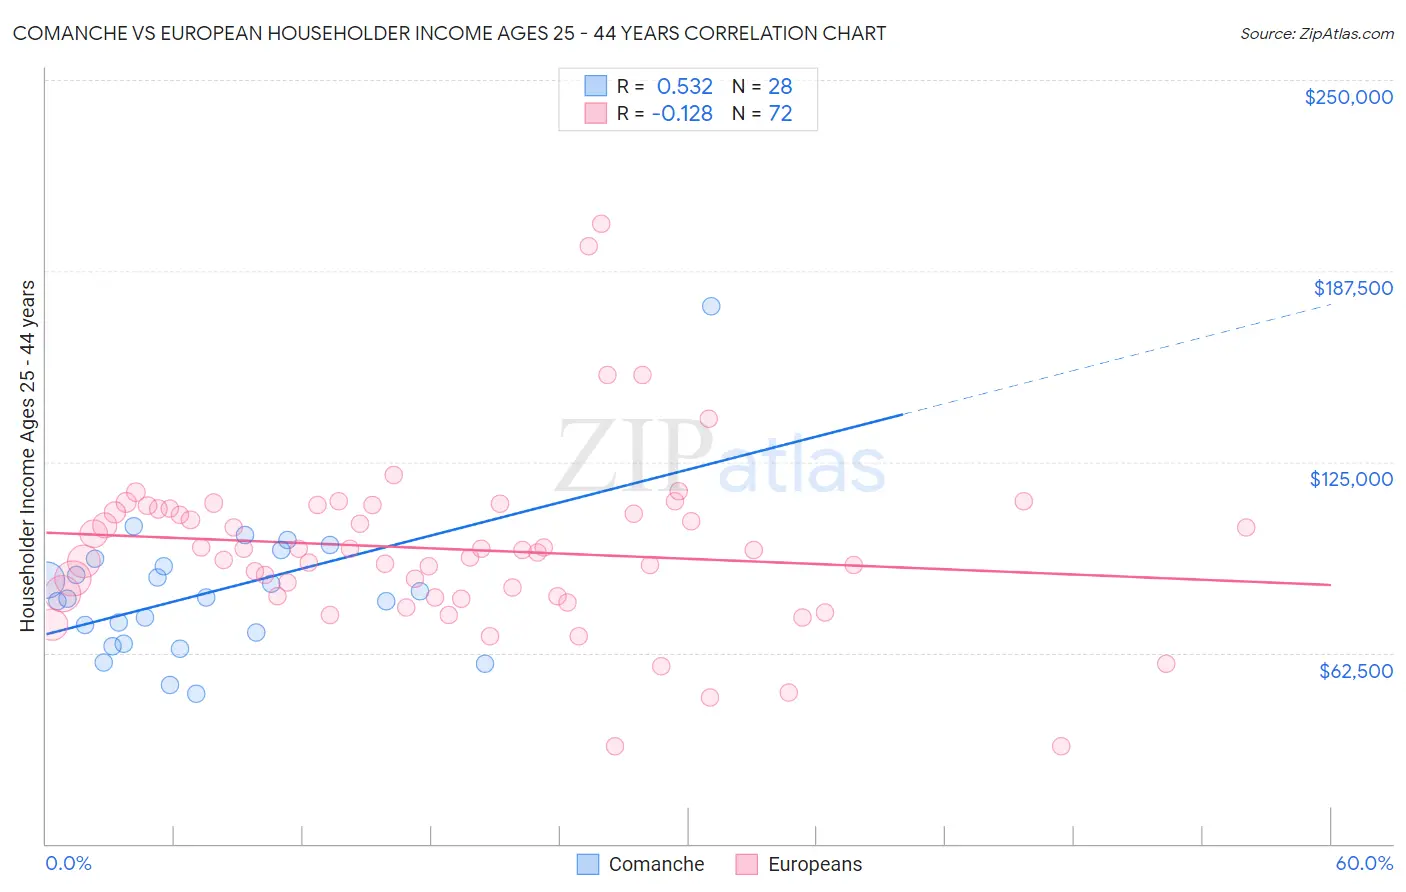 Comanche vs European Householder Income Ages 25 - 44 years